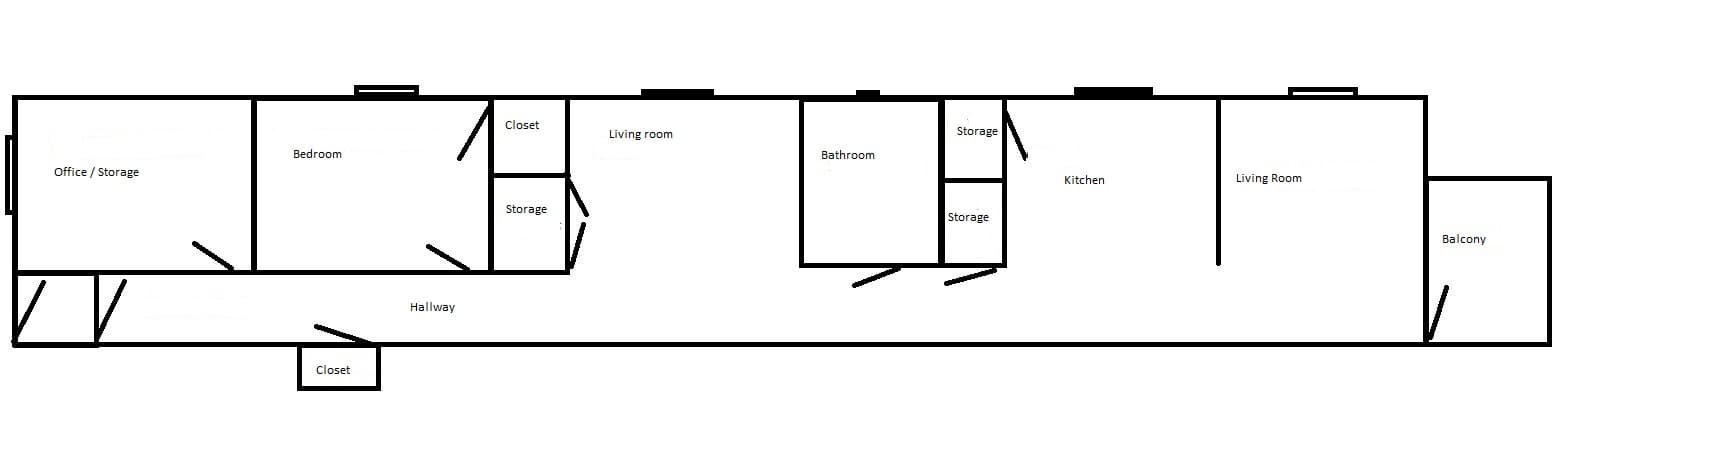 Plan of our condo before renovations